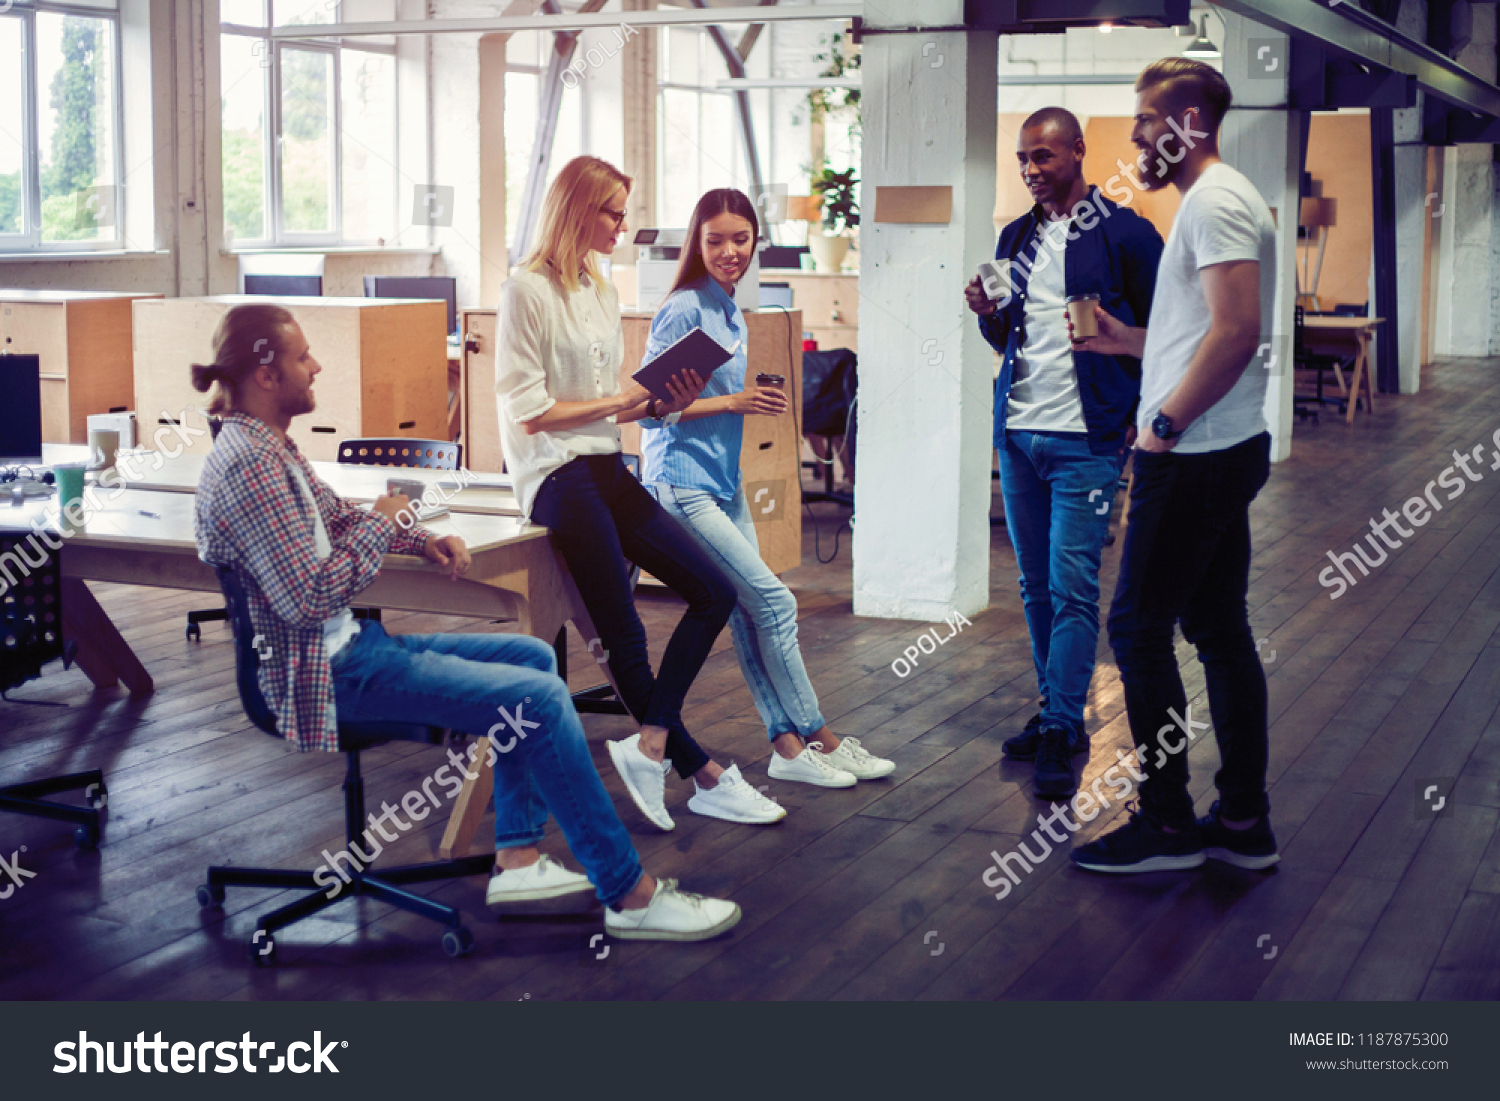 Happy to work together. Group of young business people communicating while working in the office #1187875300